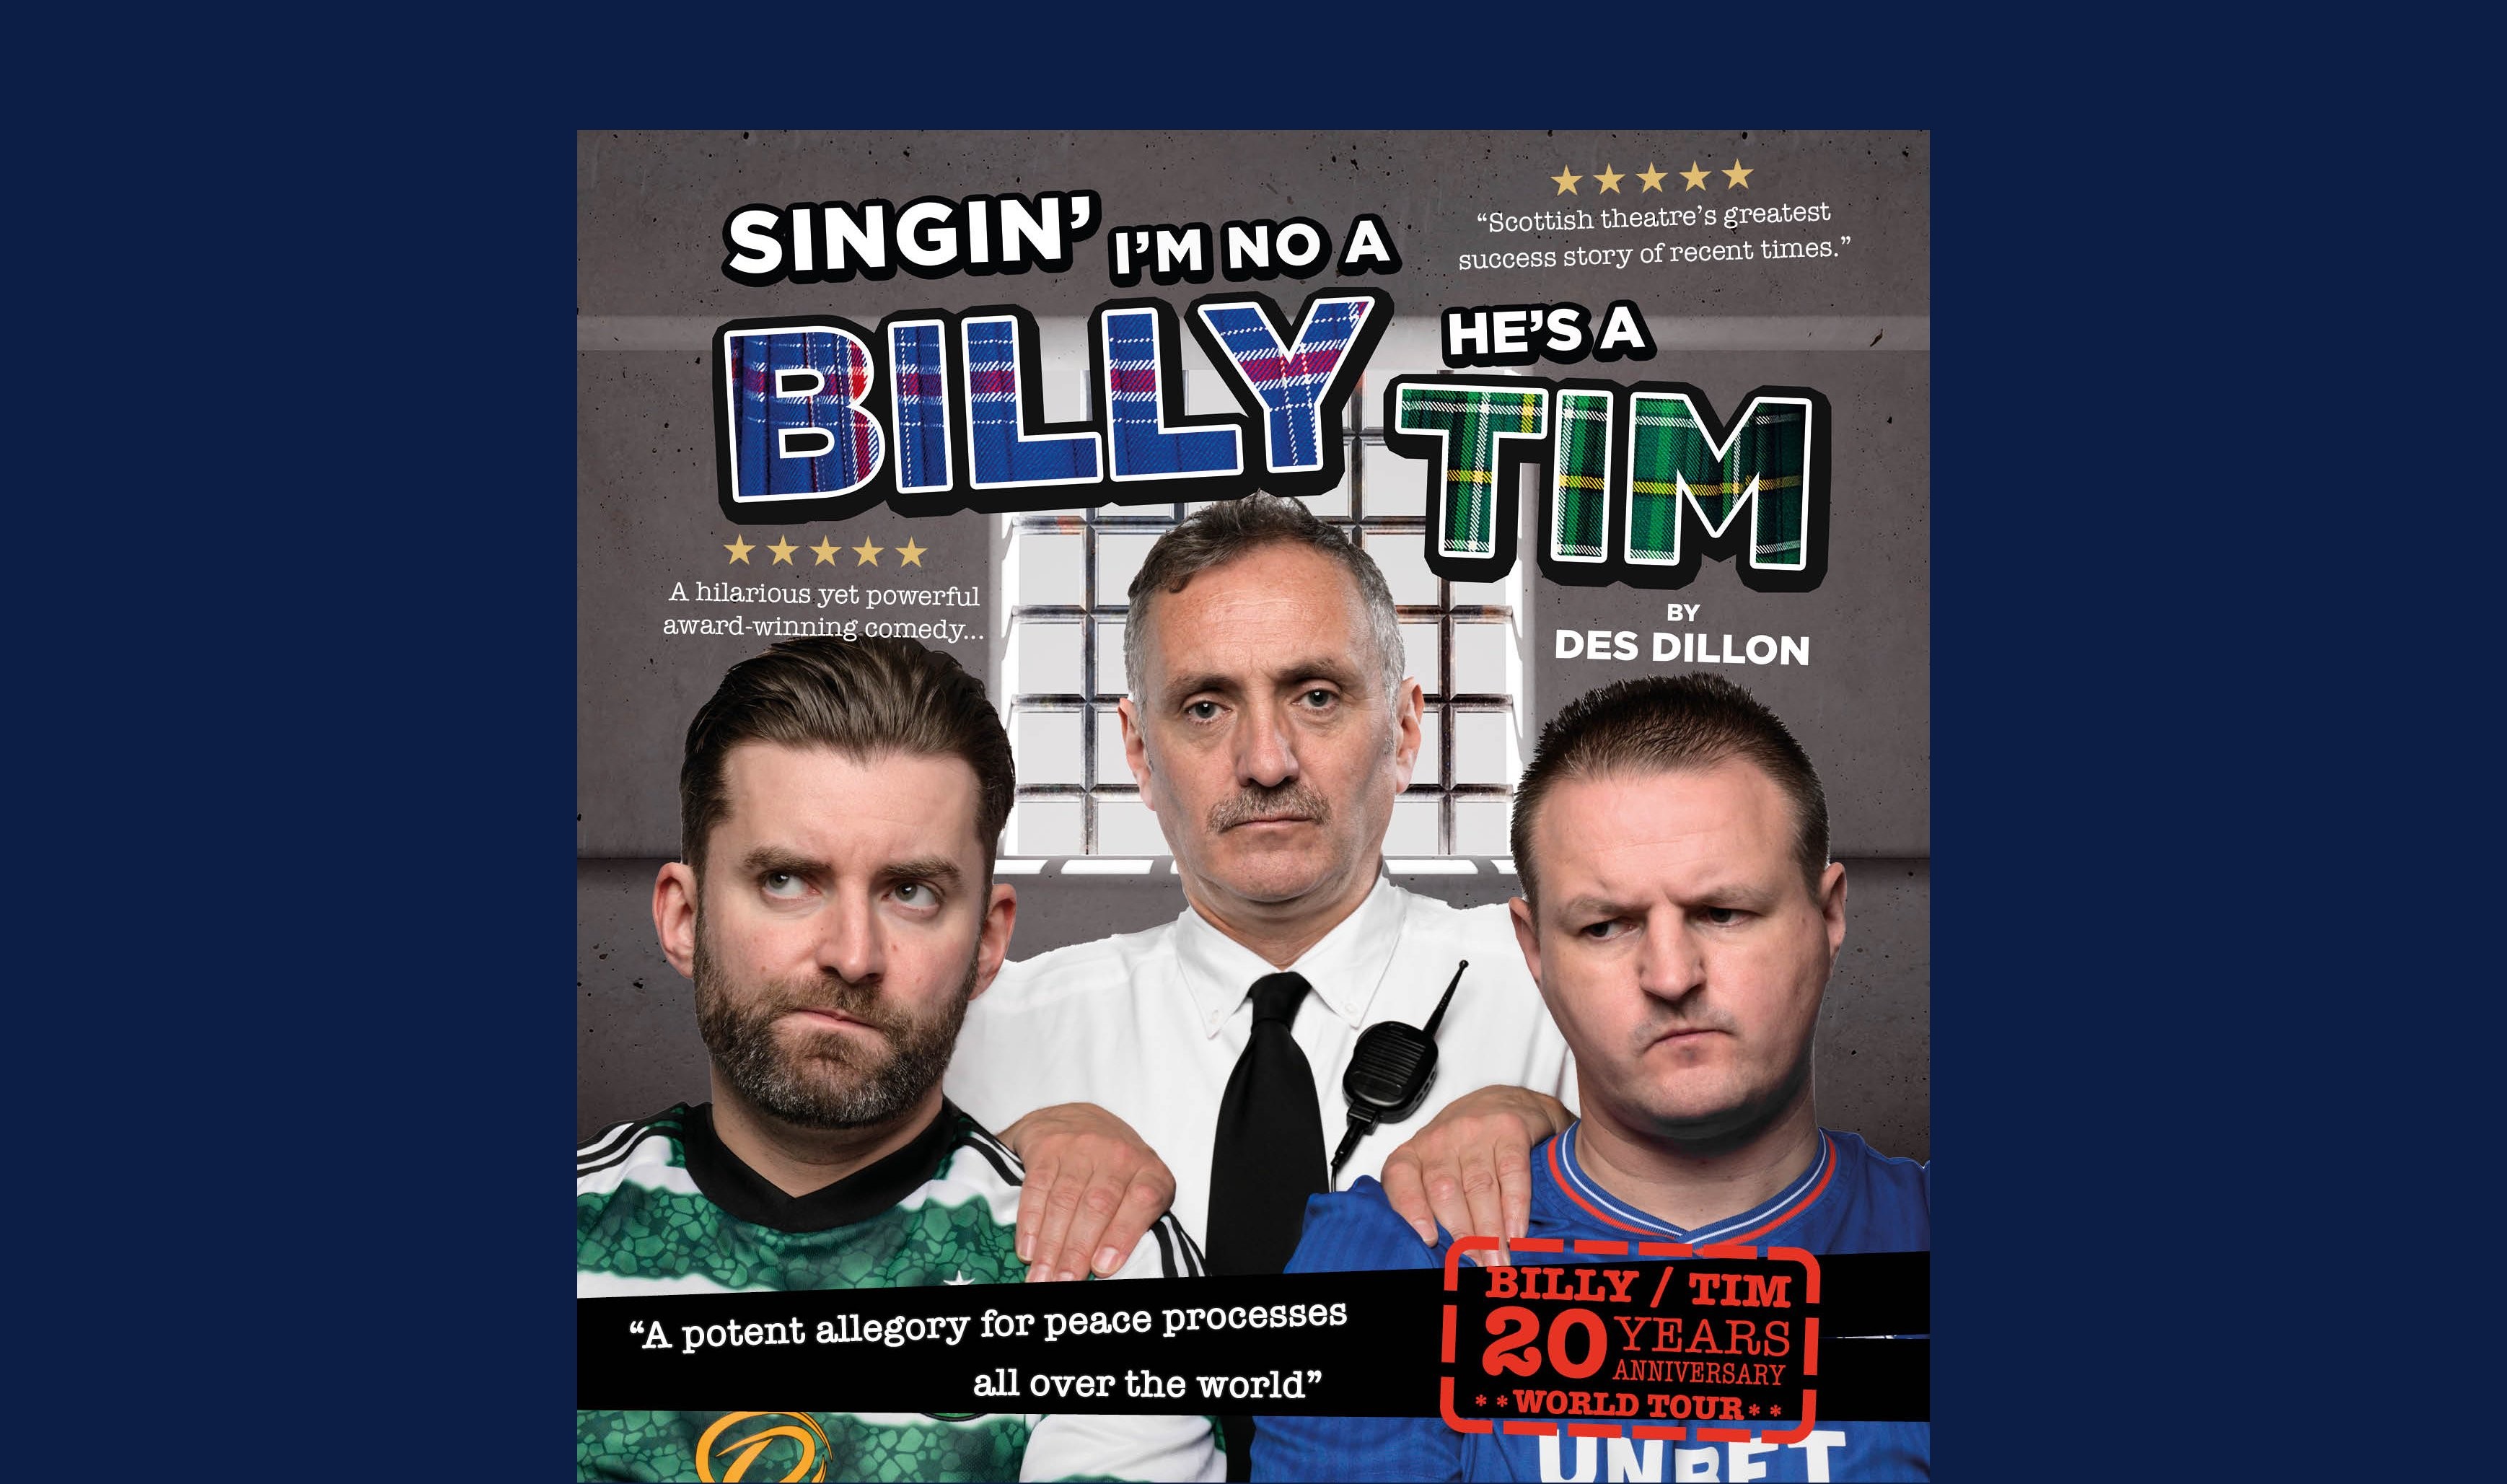 SINGIN’ I’M NO A BILLY HE’S A TIM - 20TH ANNIVERSARY TOUR at Cumnock Town Hall